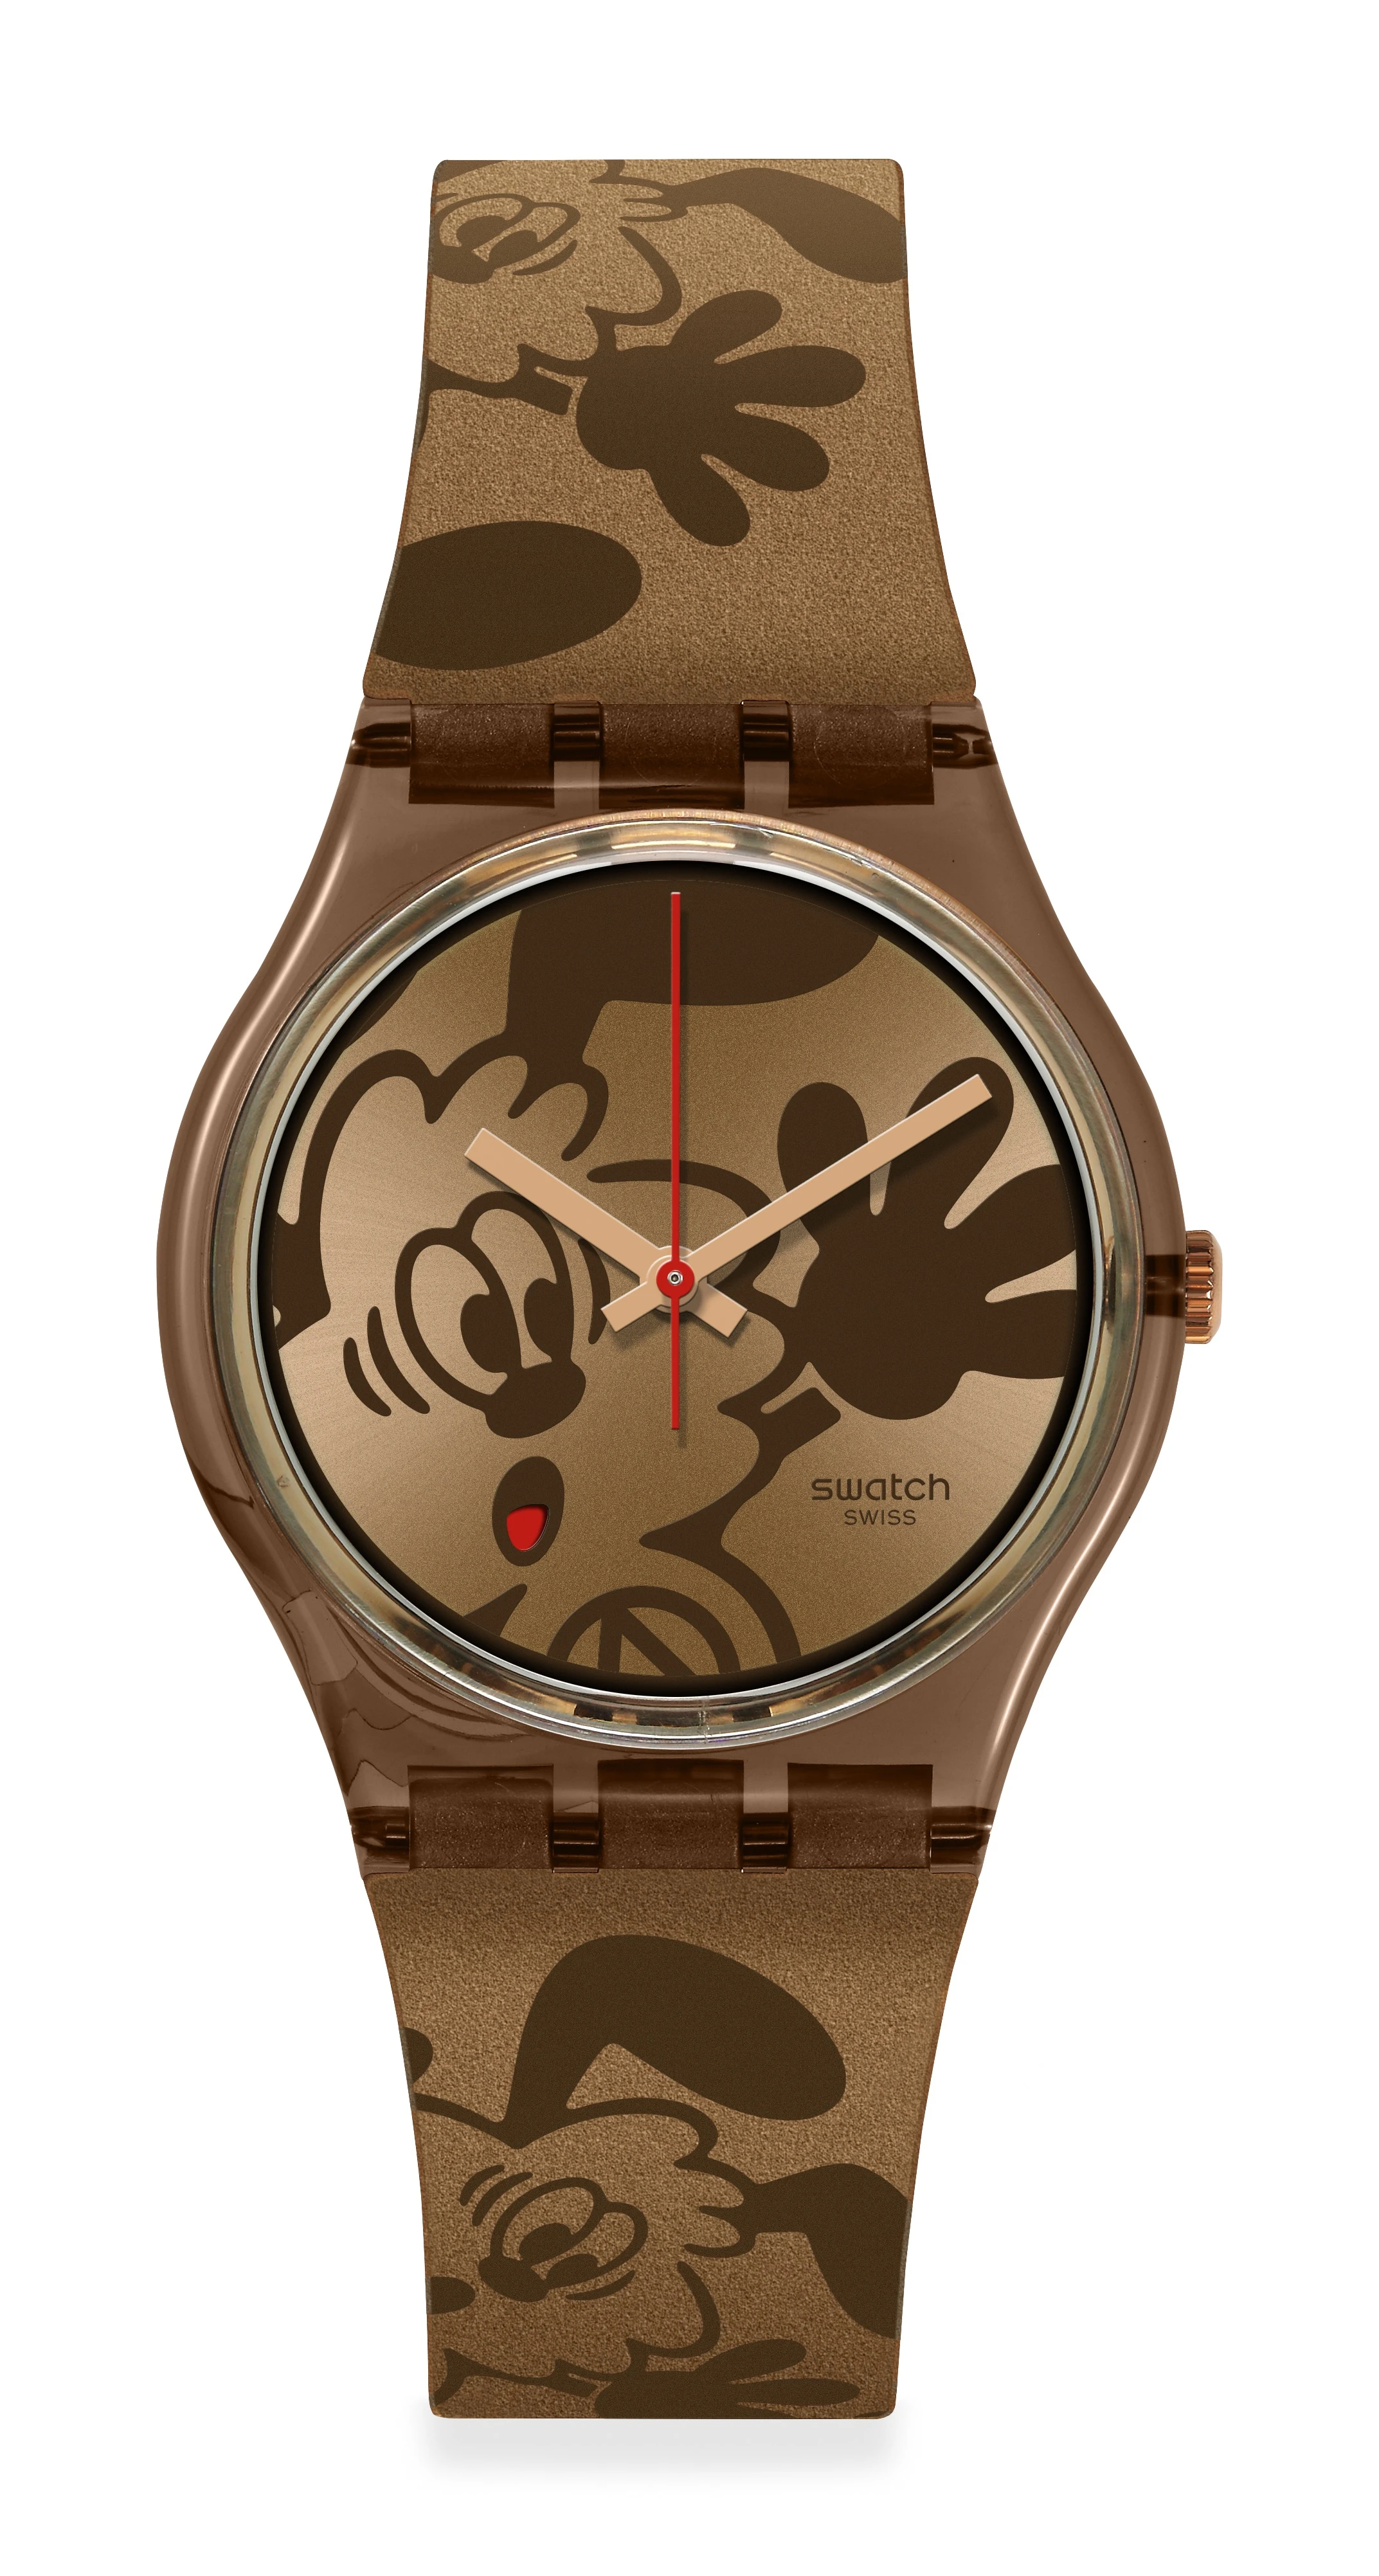 A swatch watch featuring a camouflage design with a cartoon monkey face on the dial, highlighted by red hour and minute hands.